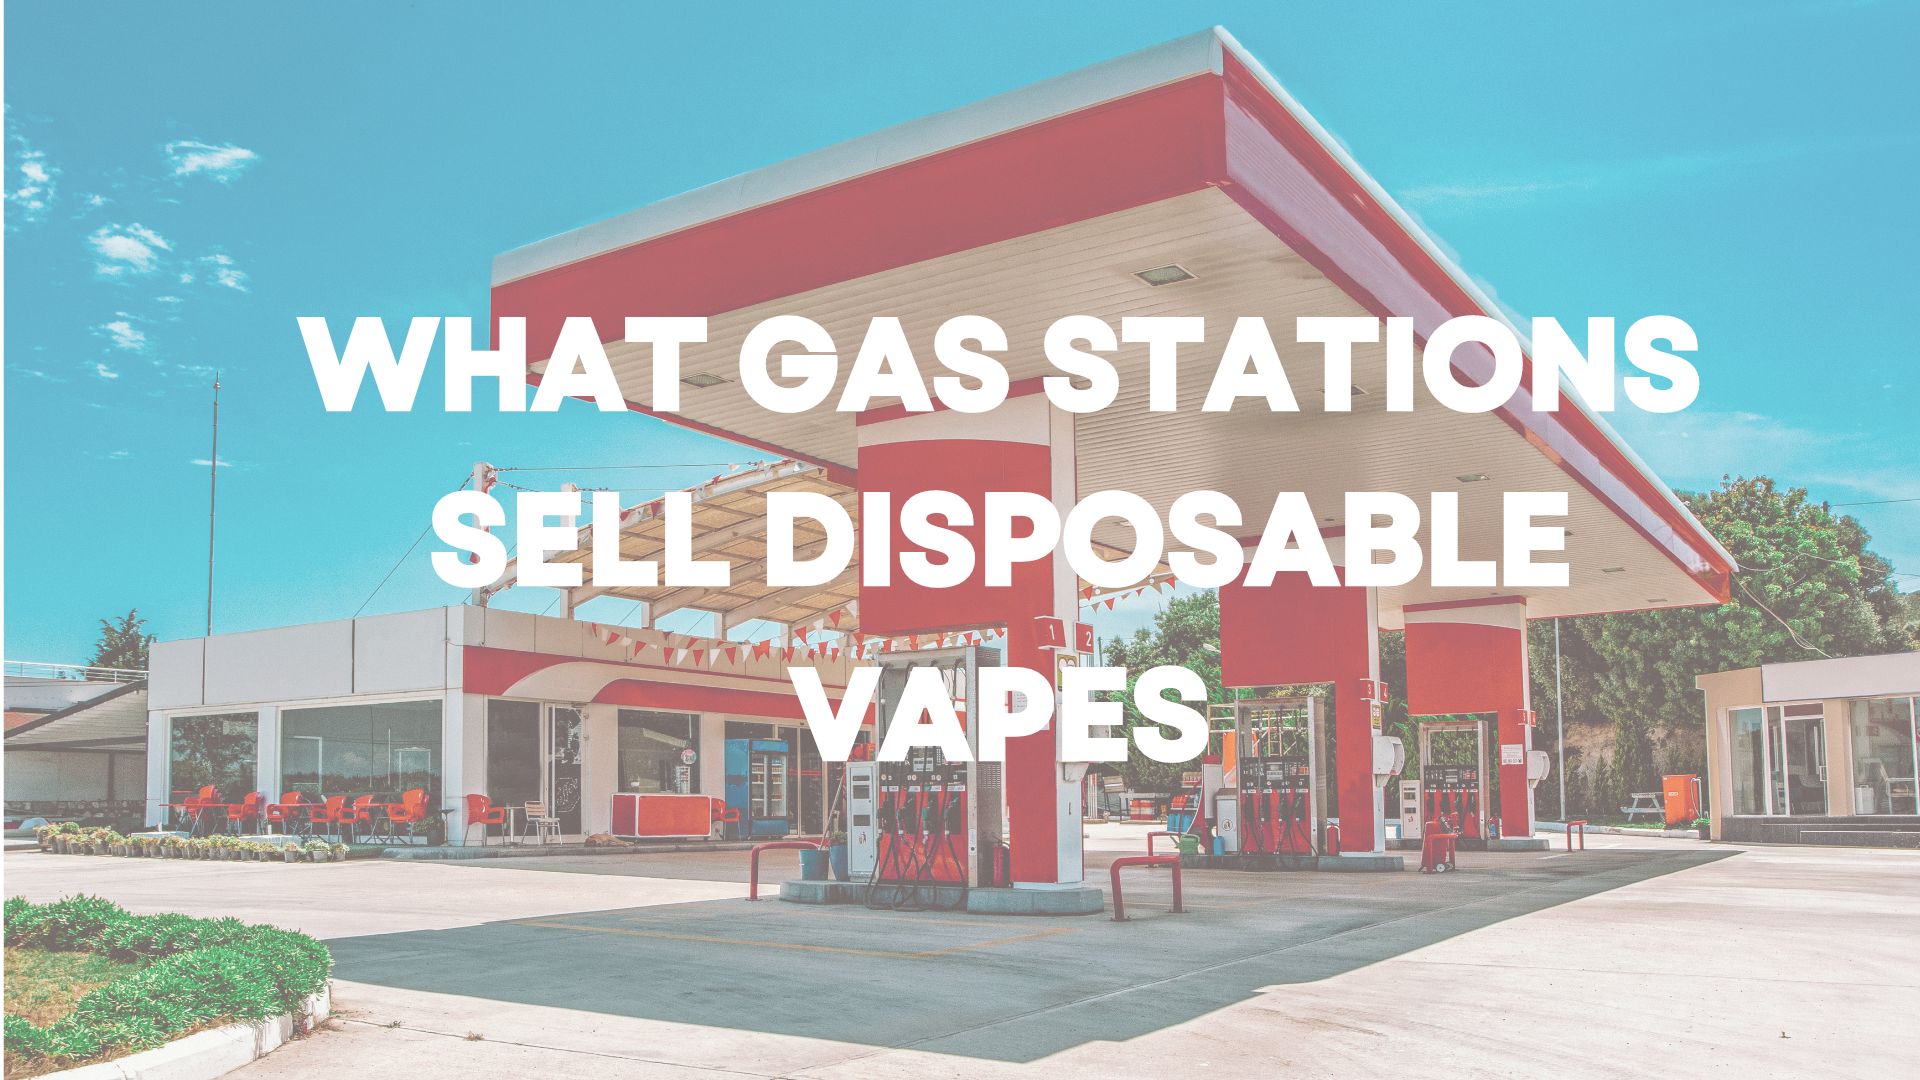 What Gas Stations Sell Disposable Vapes